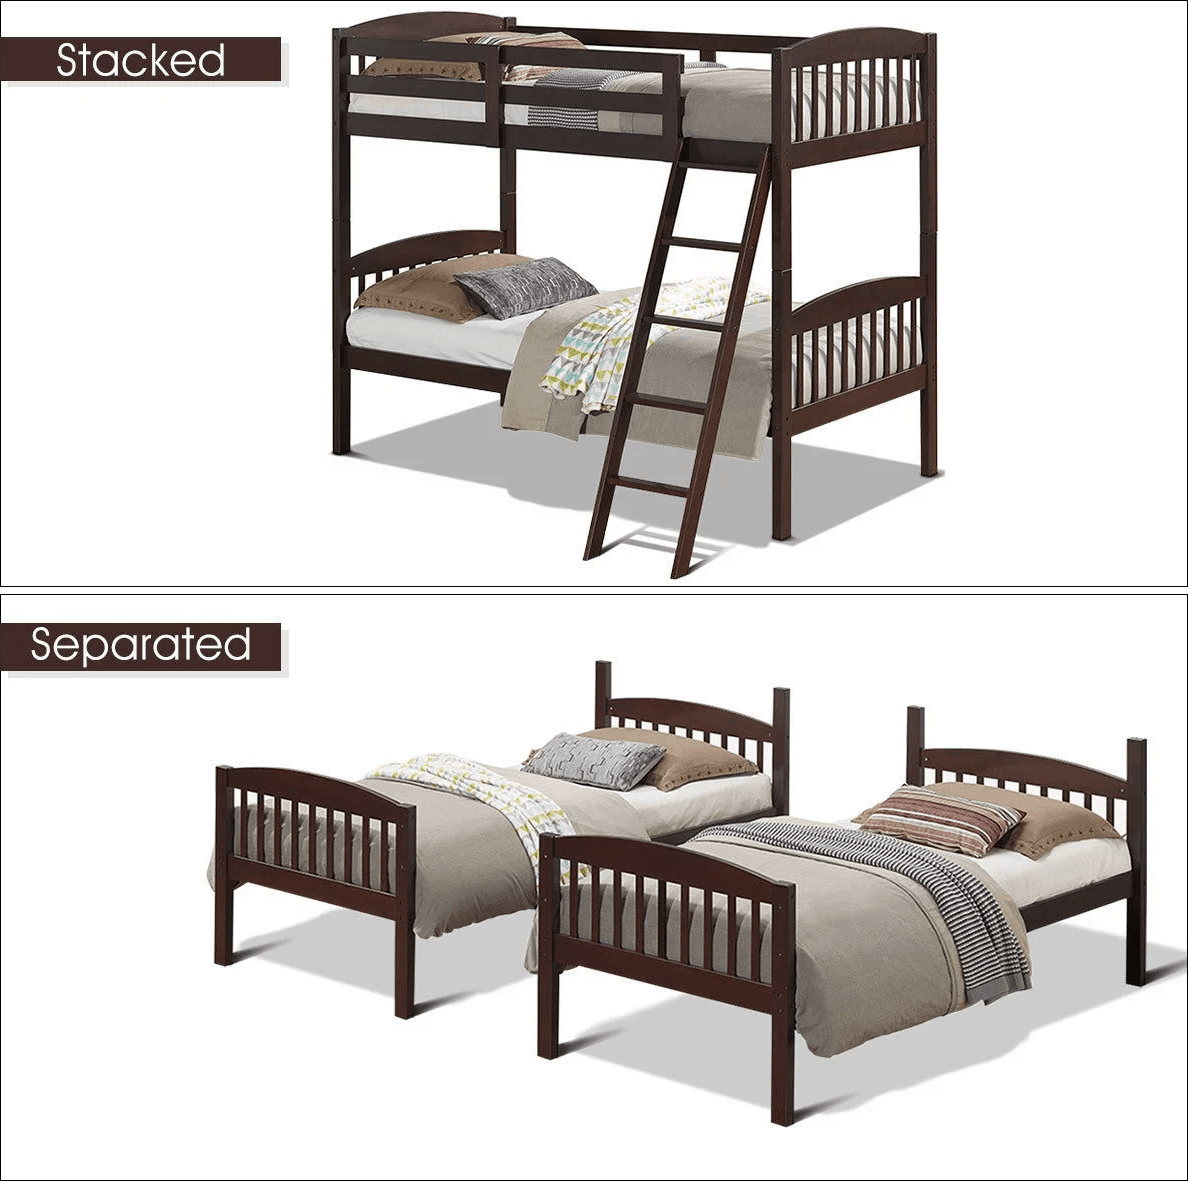 bunk beds that separate into single beds